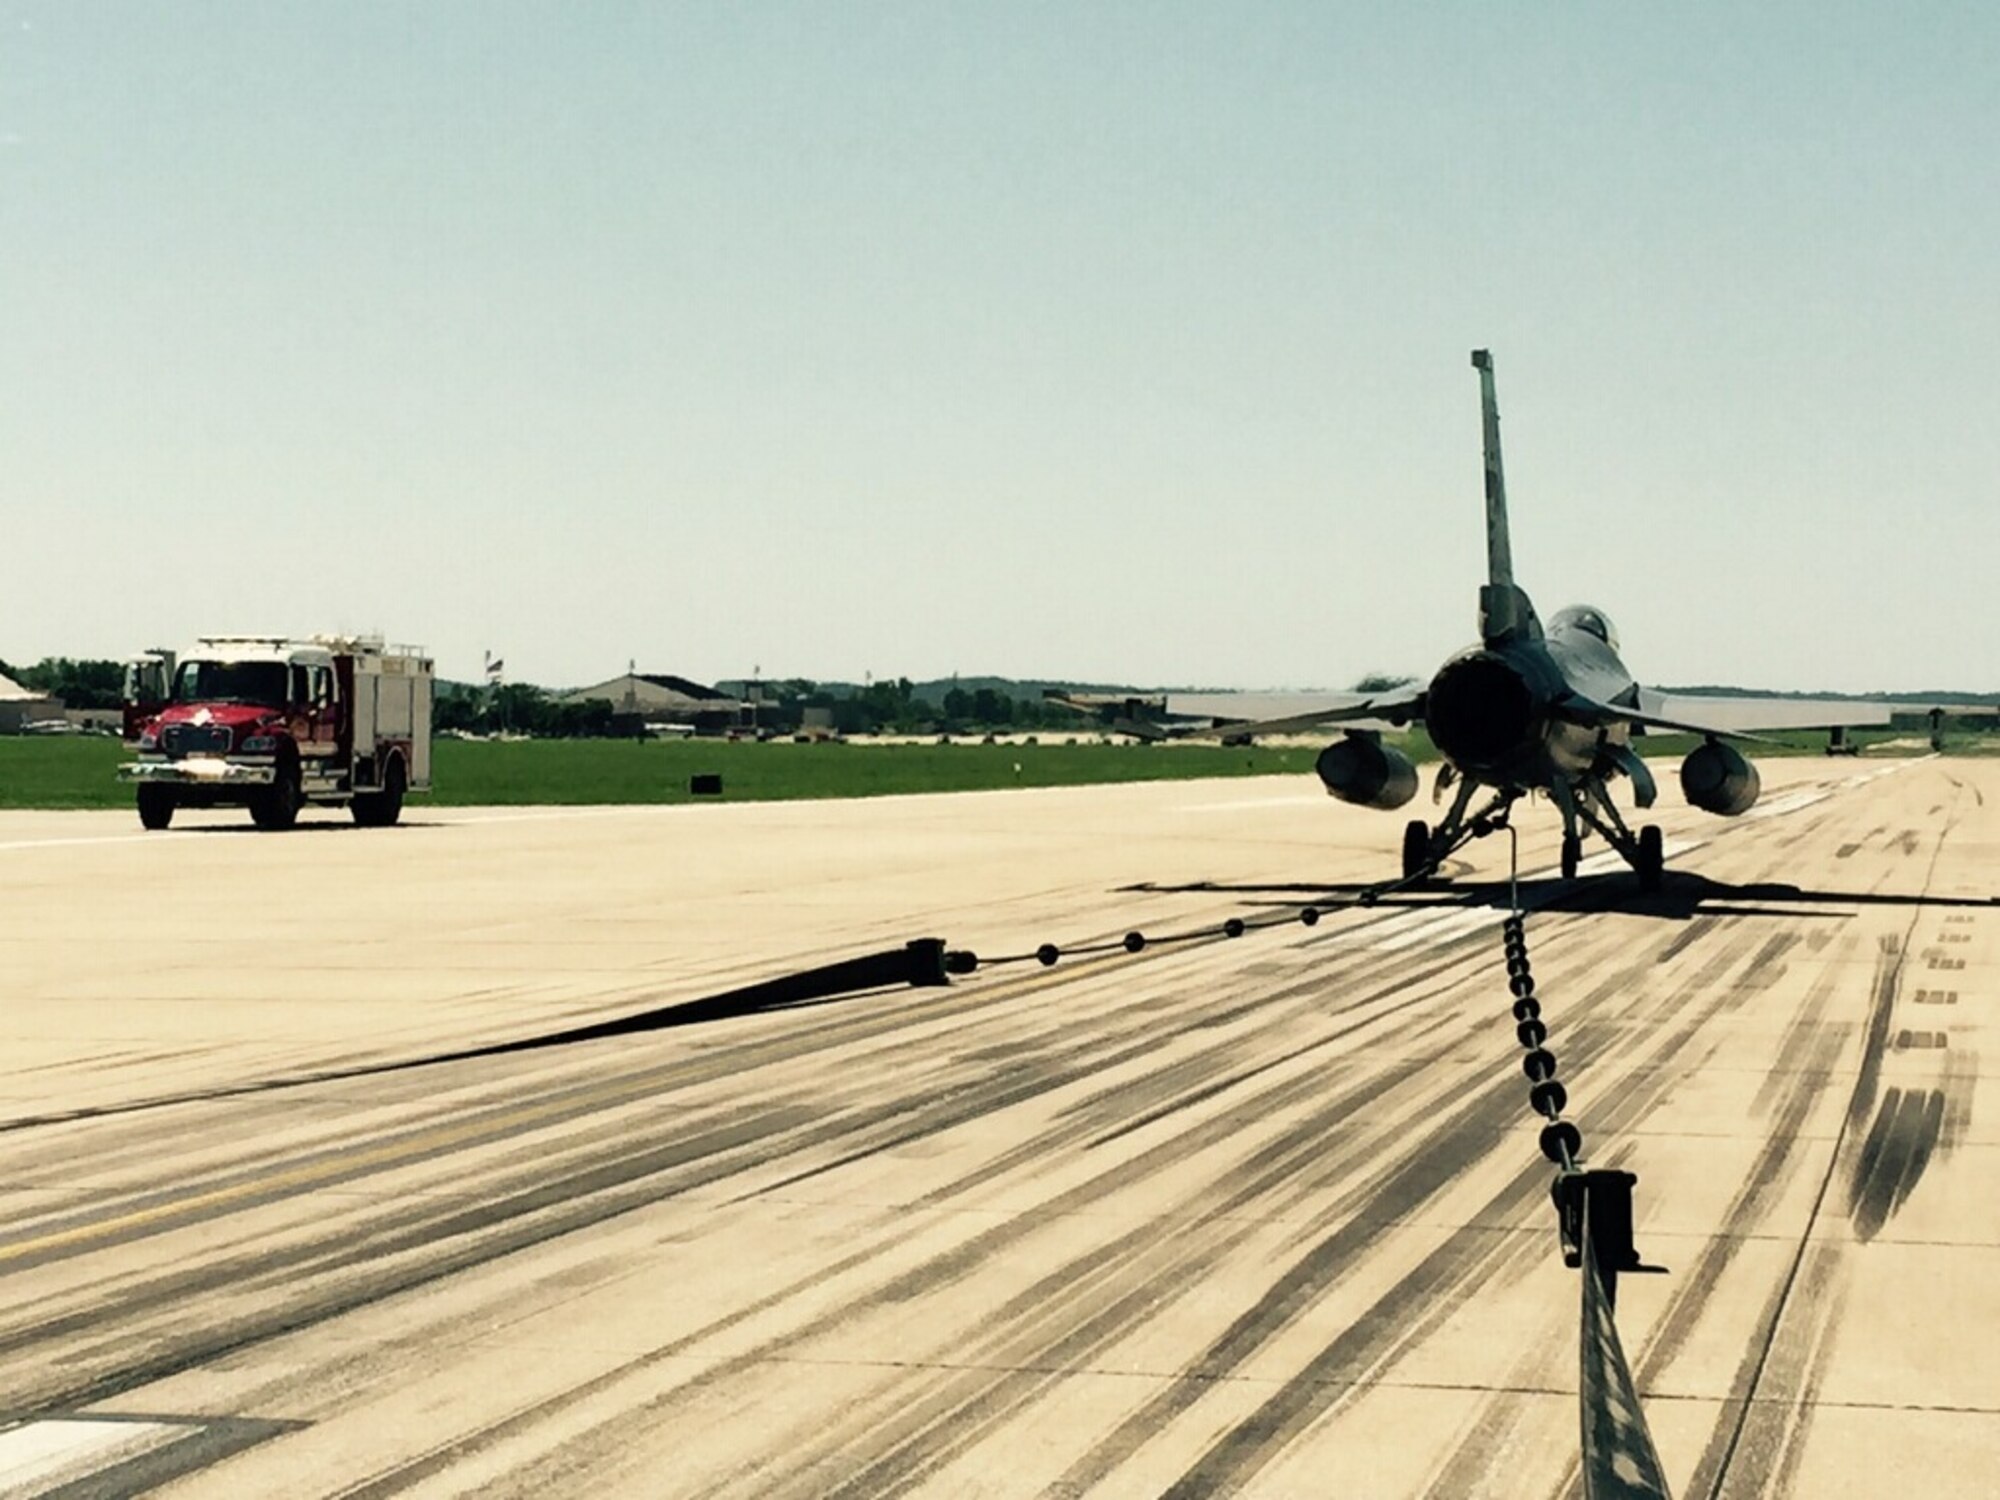 An F-16 Fighting Falcon from the 180th Fighter Wing, Ohio Air National Guard, sits on the runway at Rosecrans Air National Guard Base, St. Joseph, Mo., June 8, 2015. The aircraft was used to test and certify the use of a mobile aircraft arresting system, or MAAS, on the runway. The MAAS will be deployed at Rosecrans during the Wings Over Whiteman Airshow at Whiteman Air Force Base as a backup for the U.S. Air Force Thunderbirds should they need maintenance before or after the air show. (U.S. Air Force photo by Senior Airman Charles Puengpan)